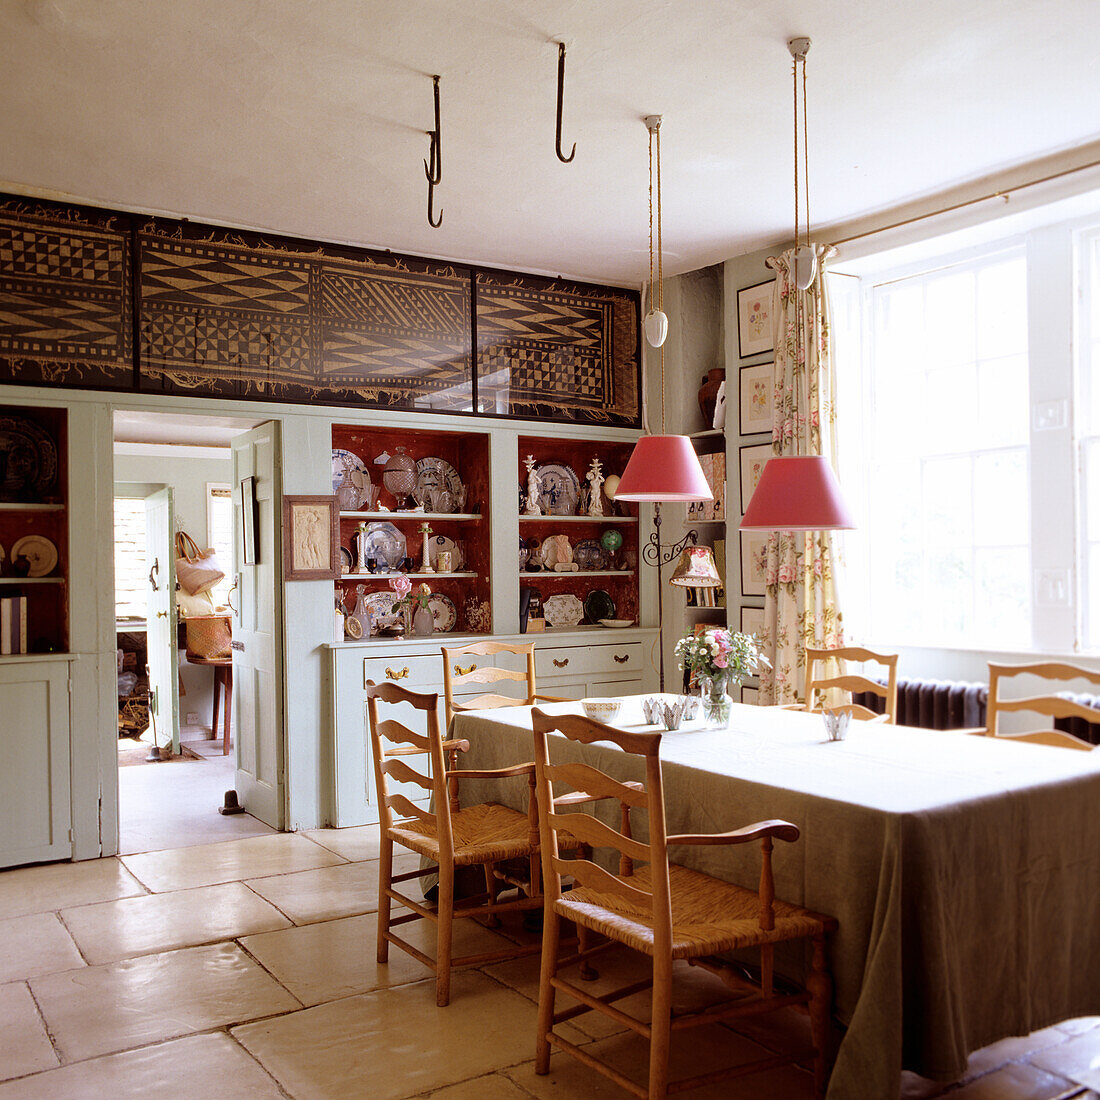 Wooden table and chairs in kitchen with traditional furnishings and shelves